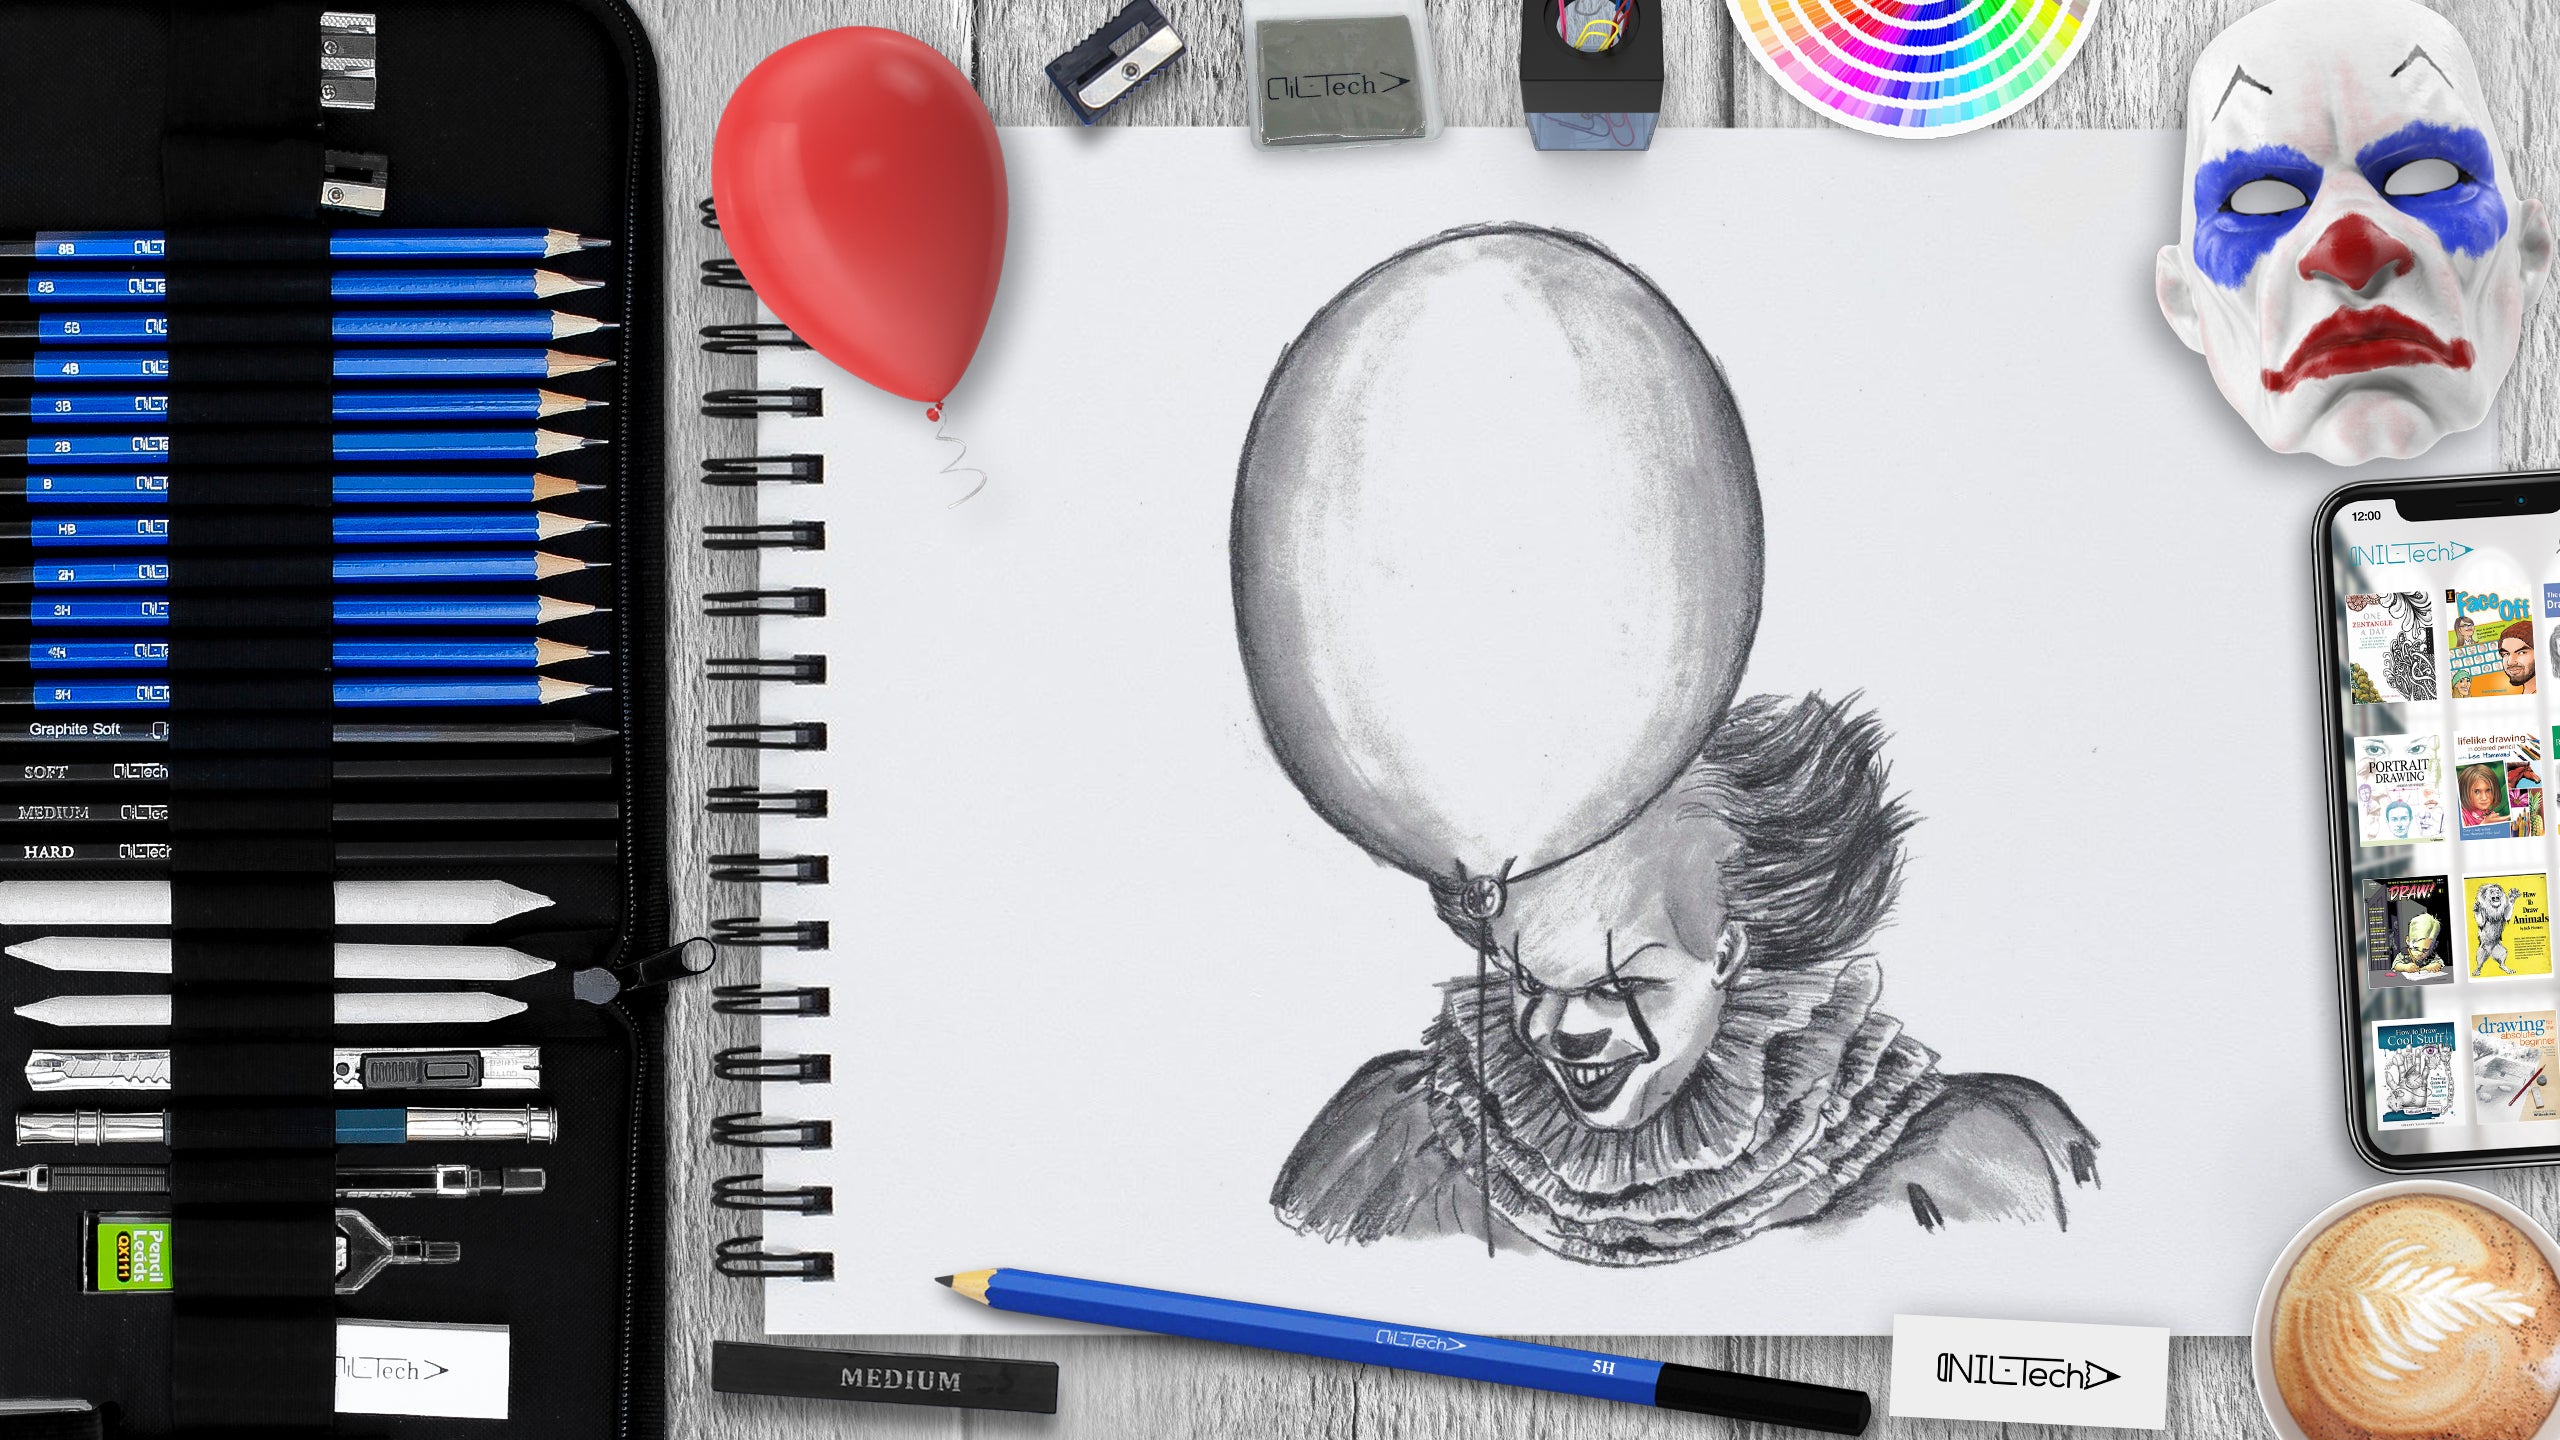 Pennywise IT Drawing 🎈  Easy halloween drawings, Scary drawings, Scary  clown drawing